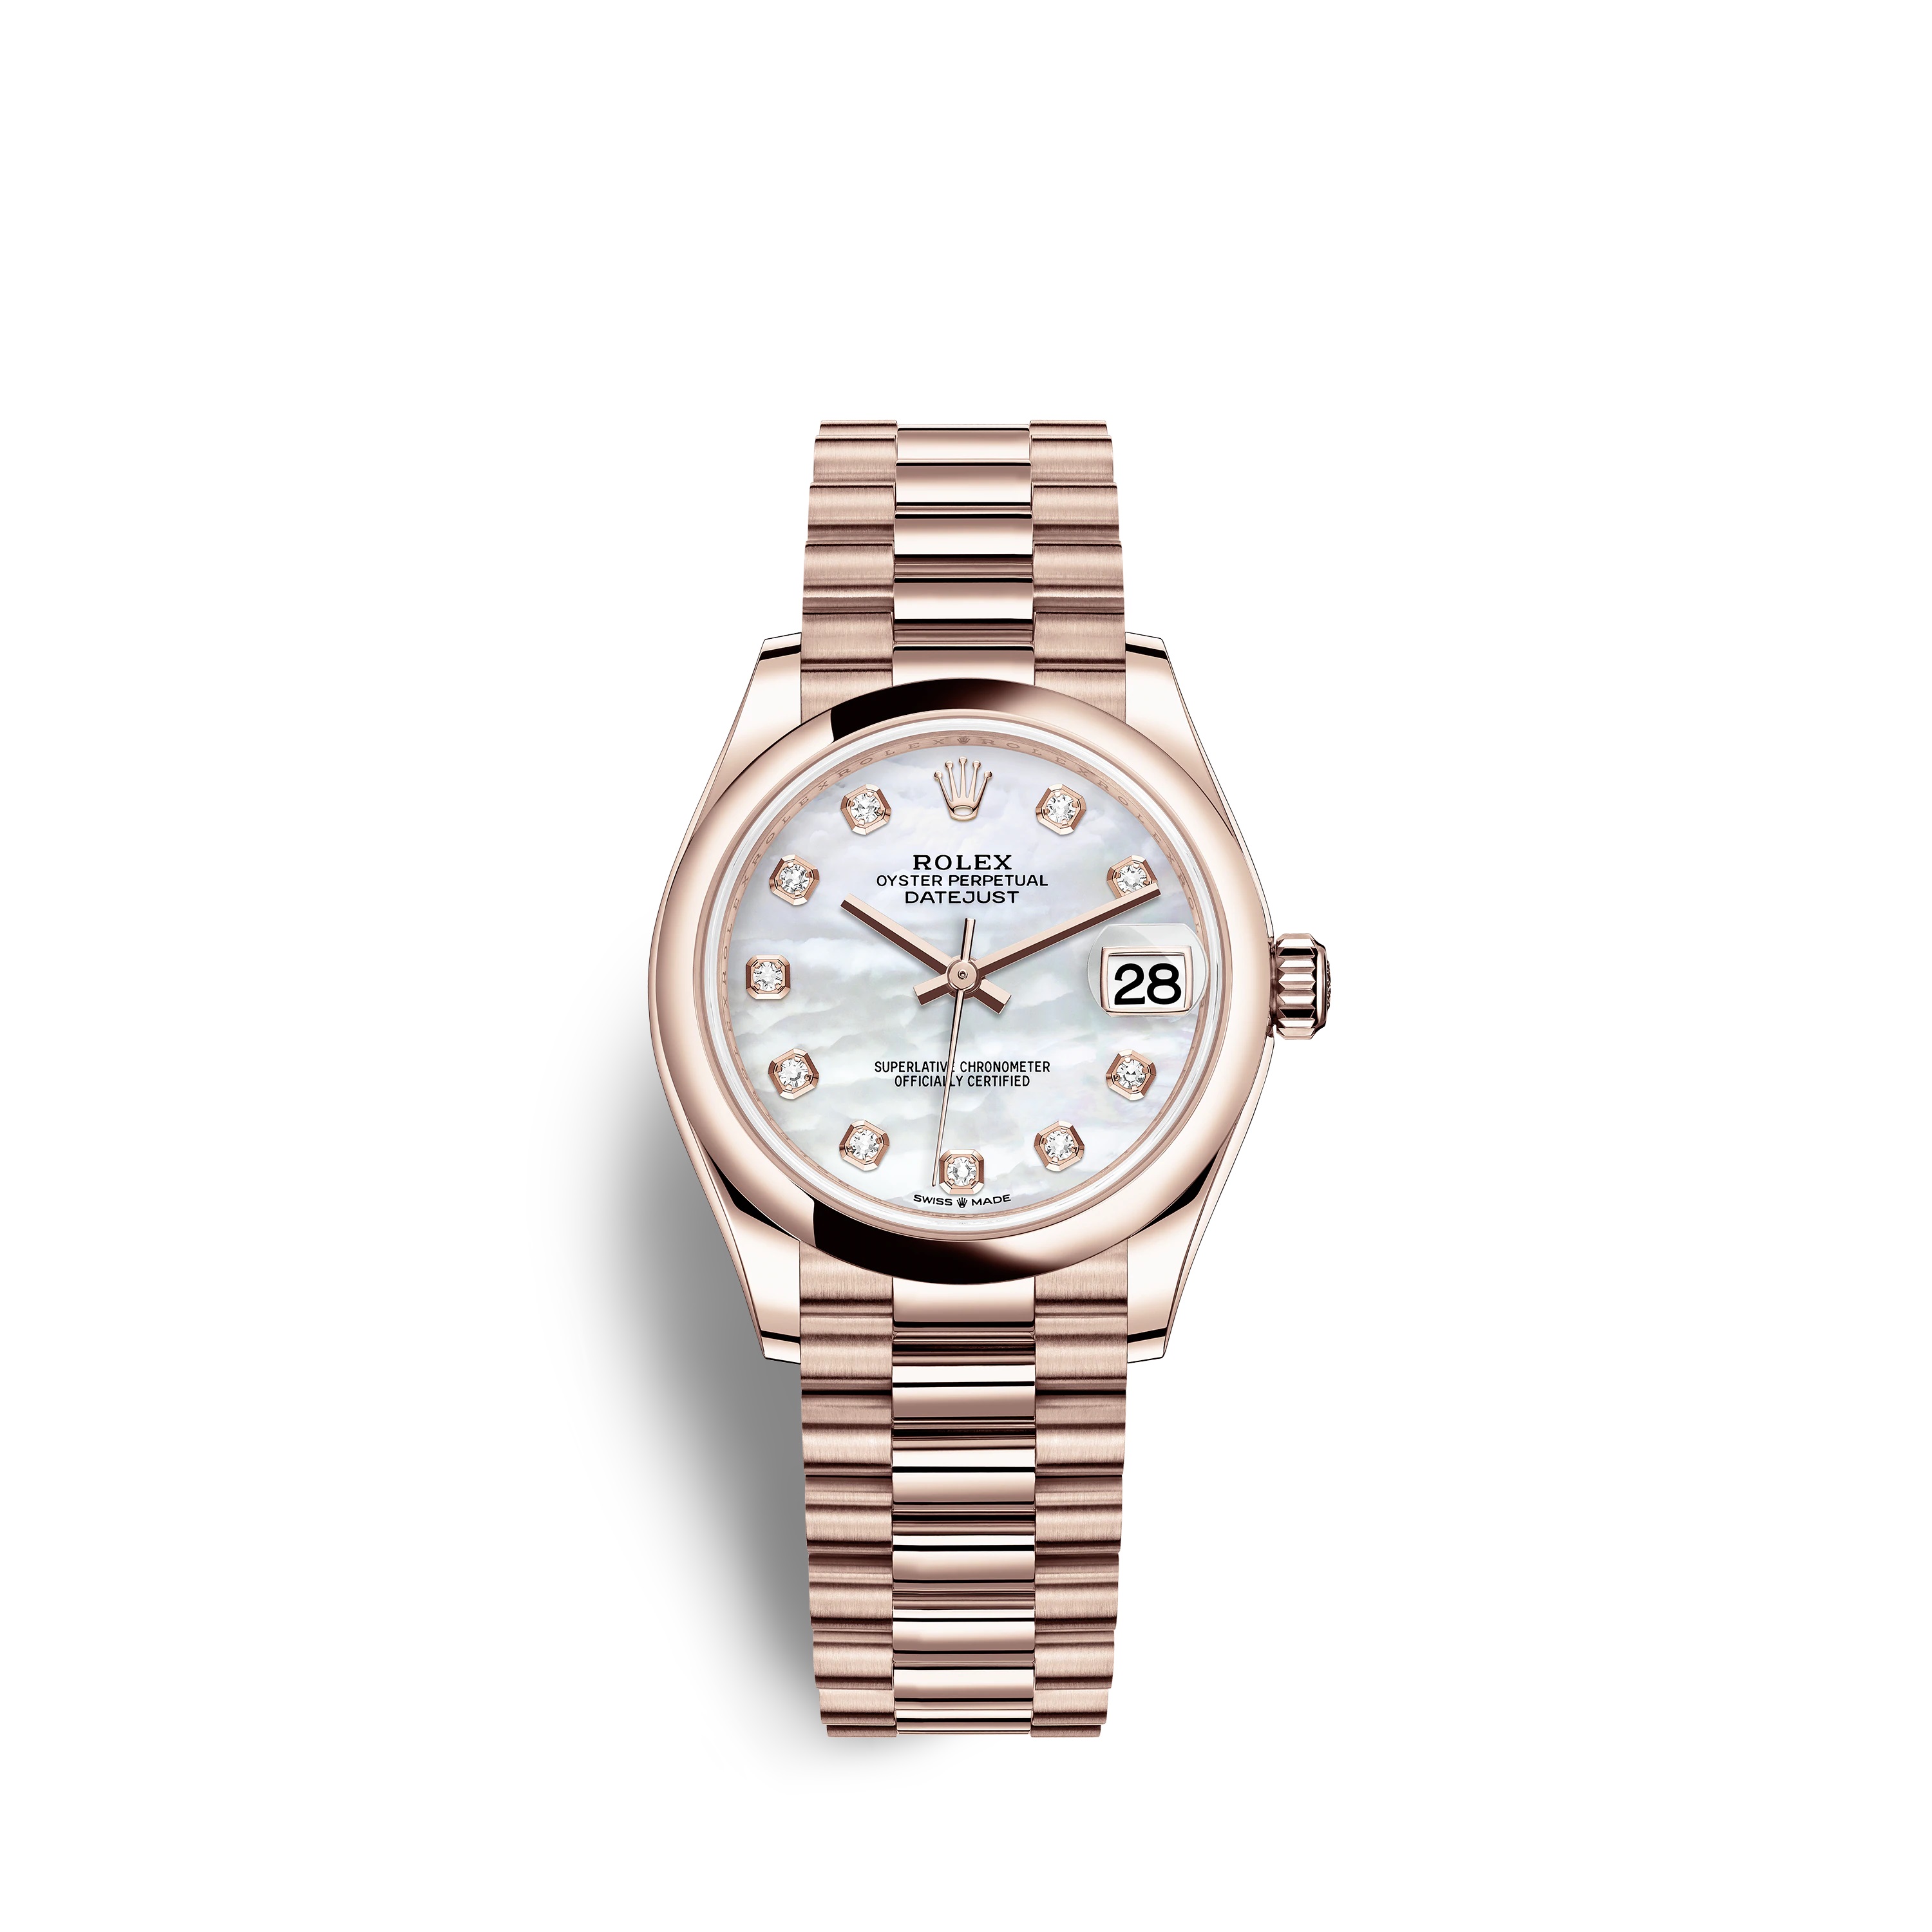 Datejust 31 278245 Rose Gold Watch (White Mother-of-Pearl Set with Diamonds)